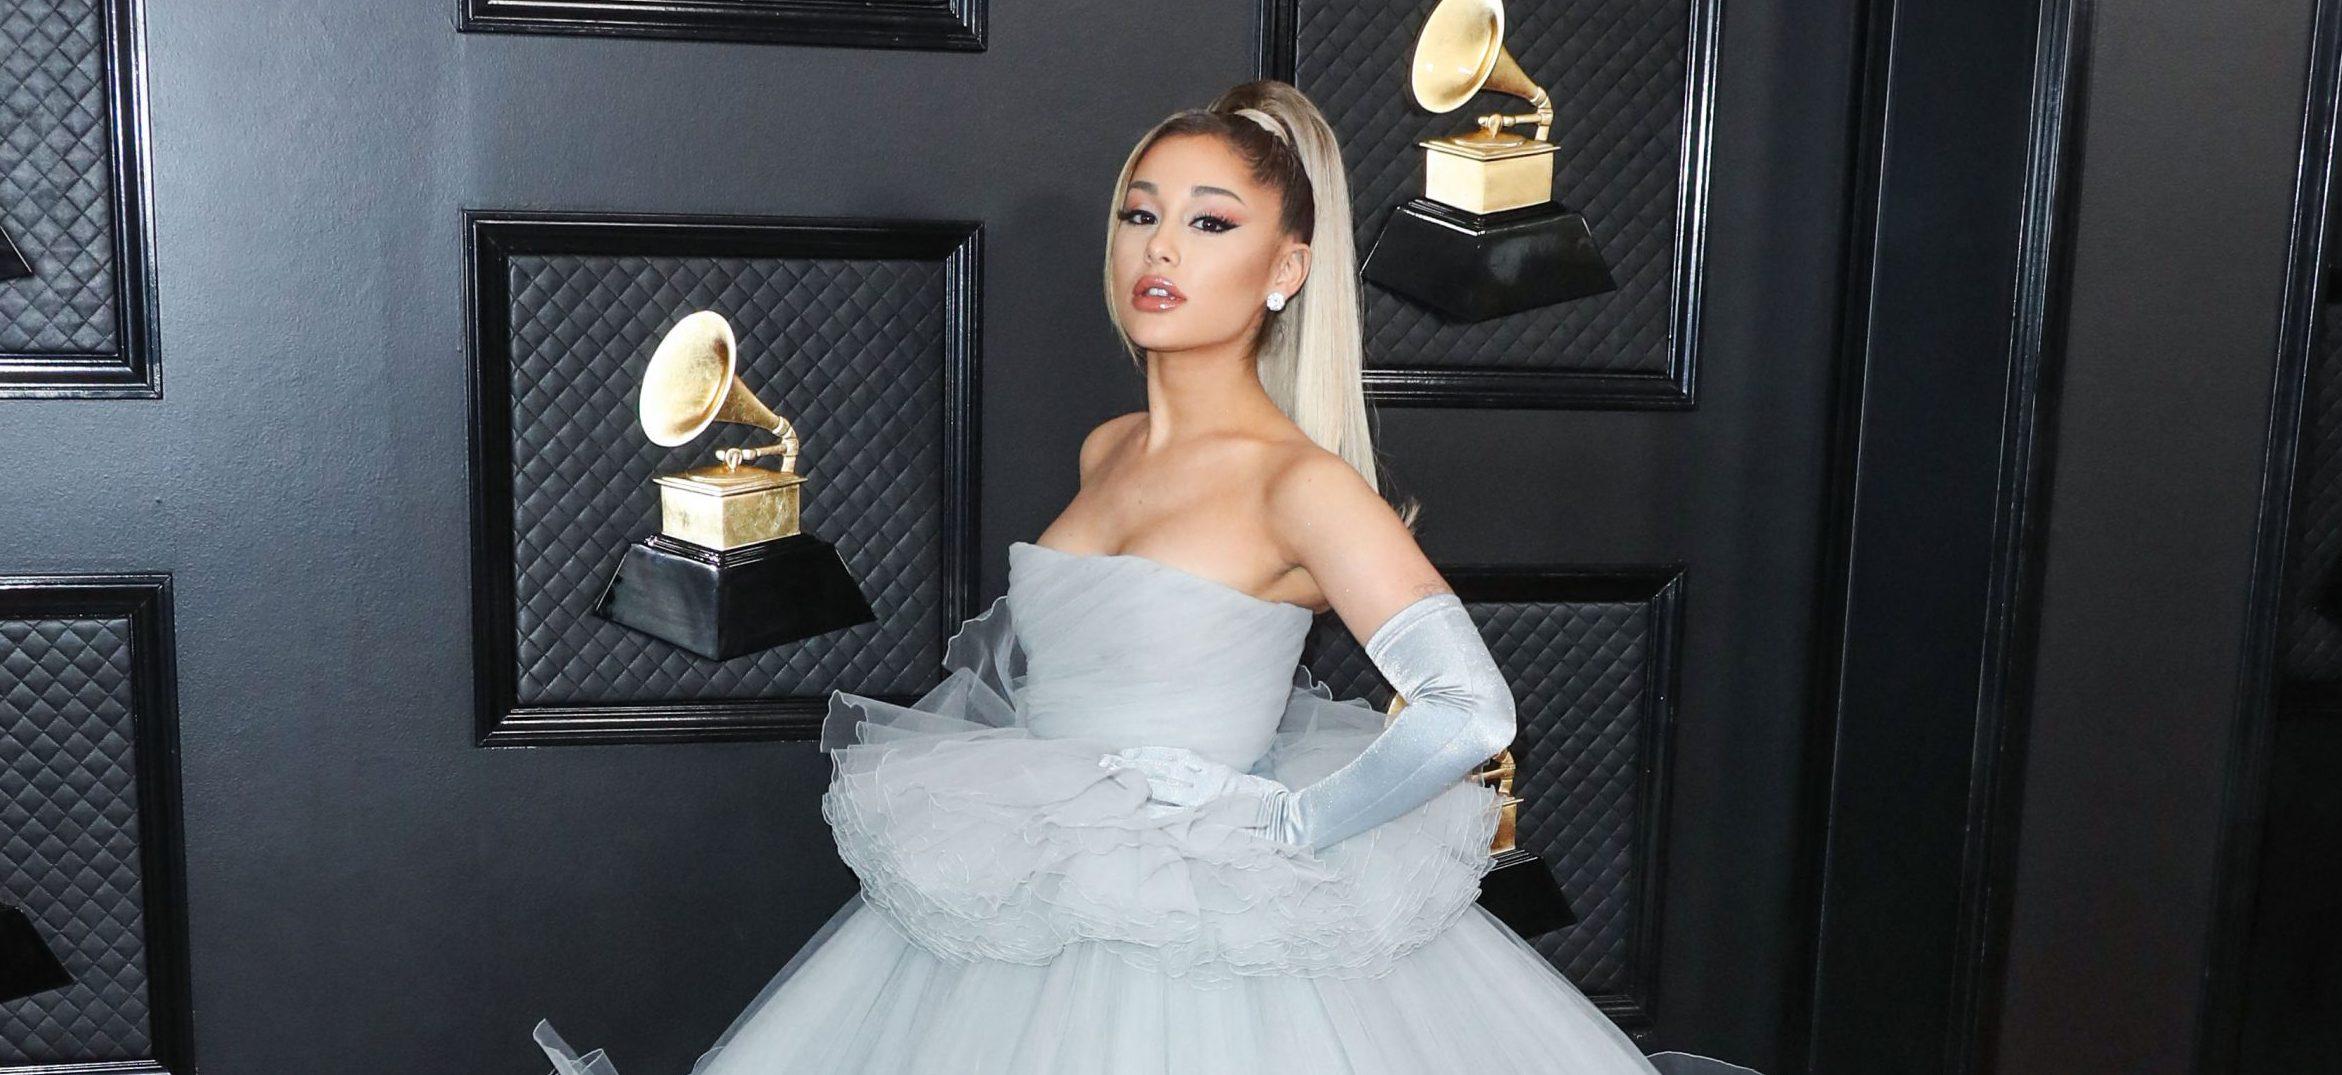 Ariana Grande Warns Fans To Be ‘Less Comfortable’ With Body Shaming